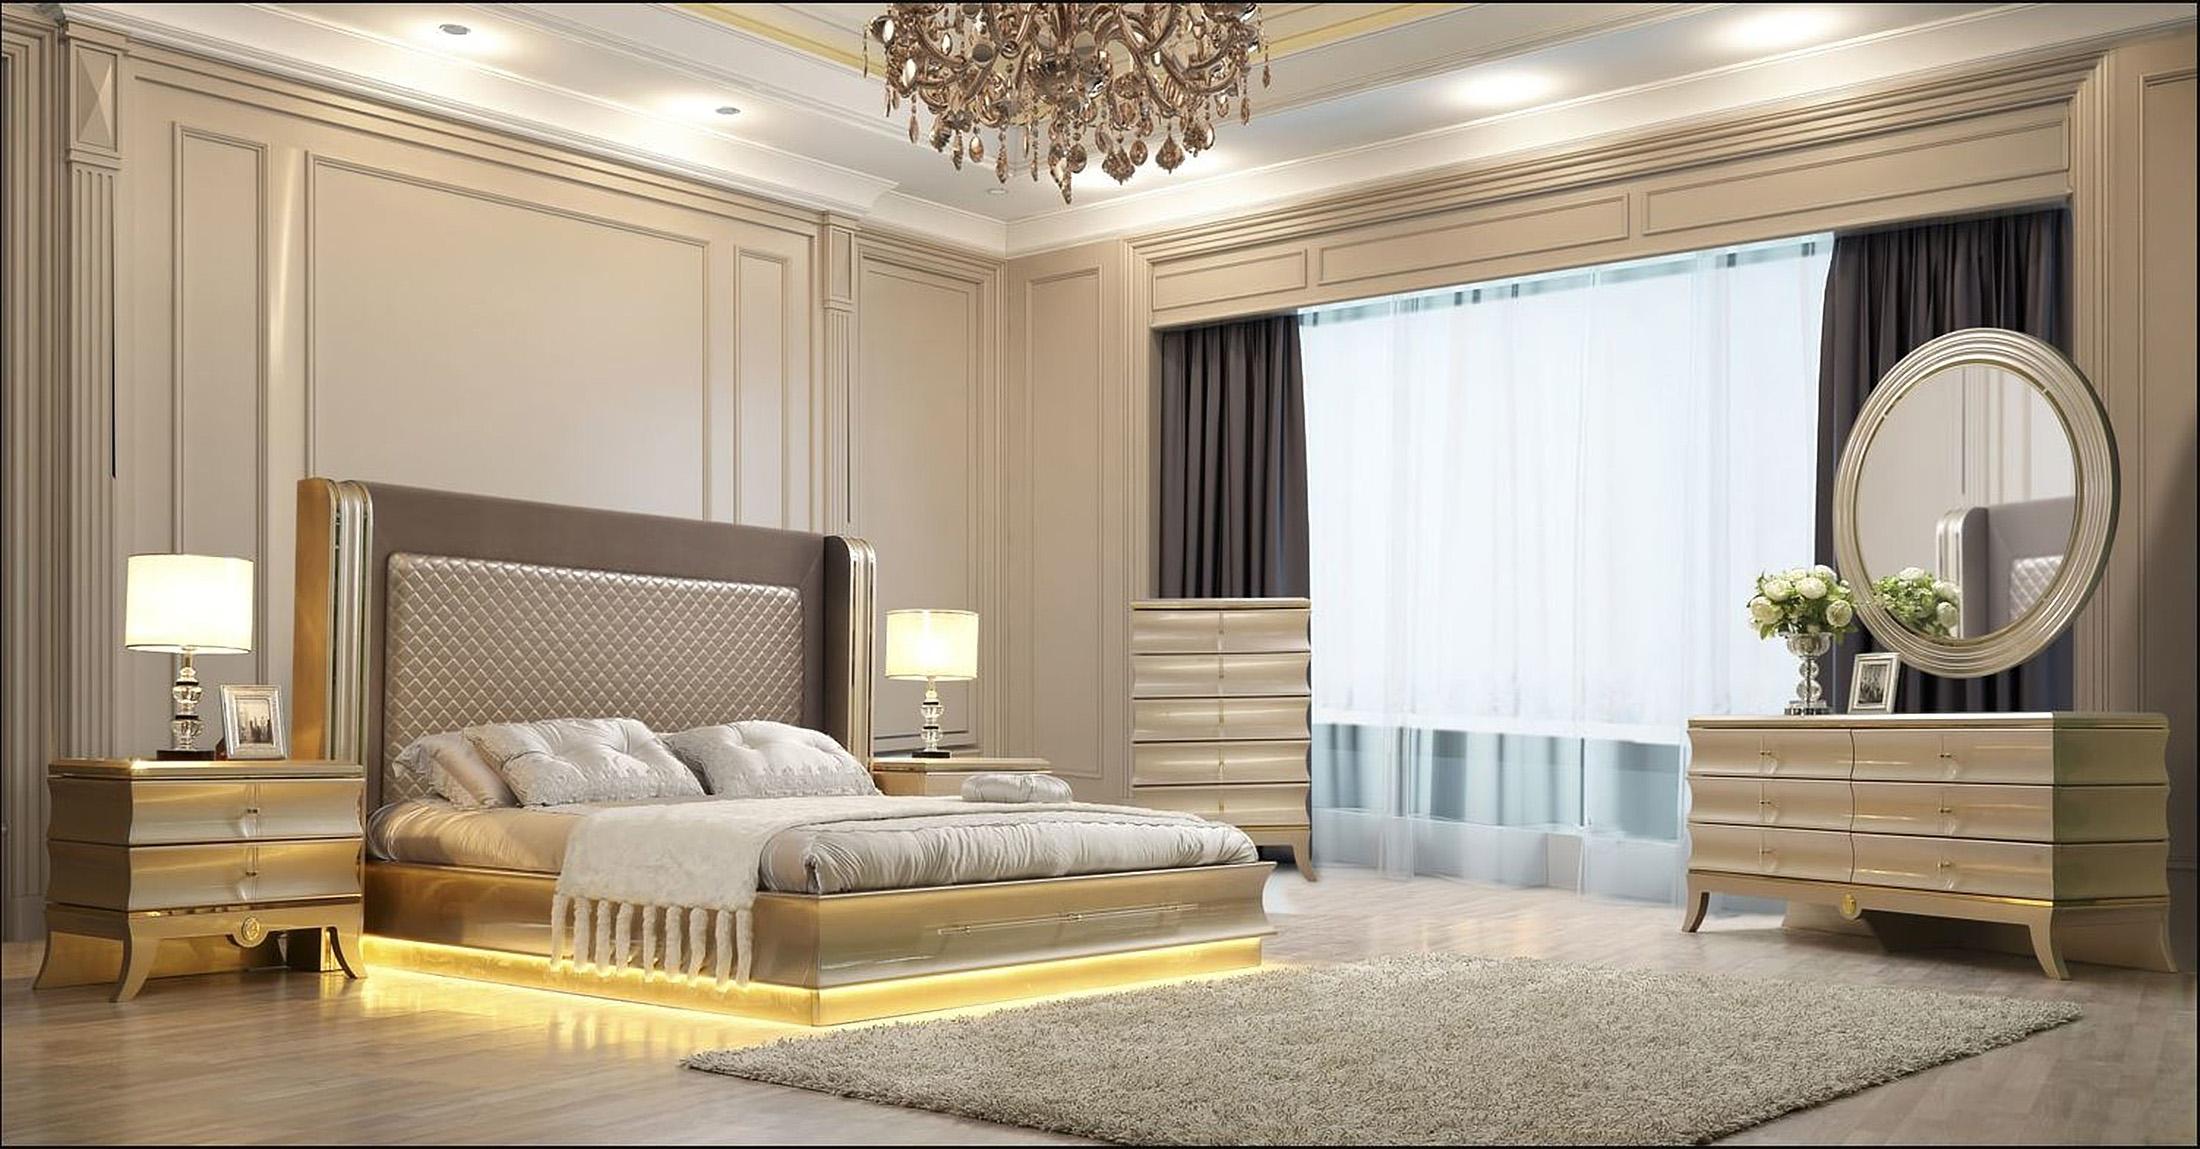 

    
Glam Belle Silver & Gold King Bedroom Set 5Pcs Contemporary Homey Design HD-925
